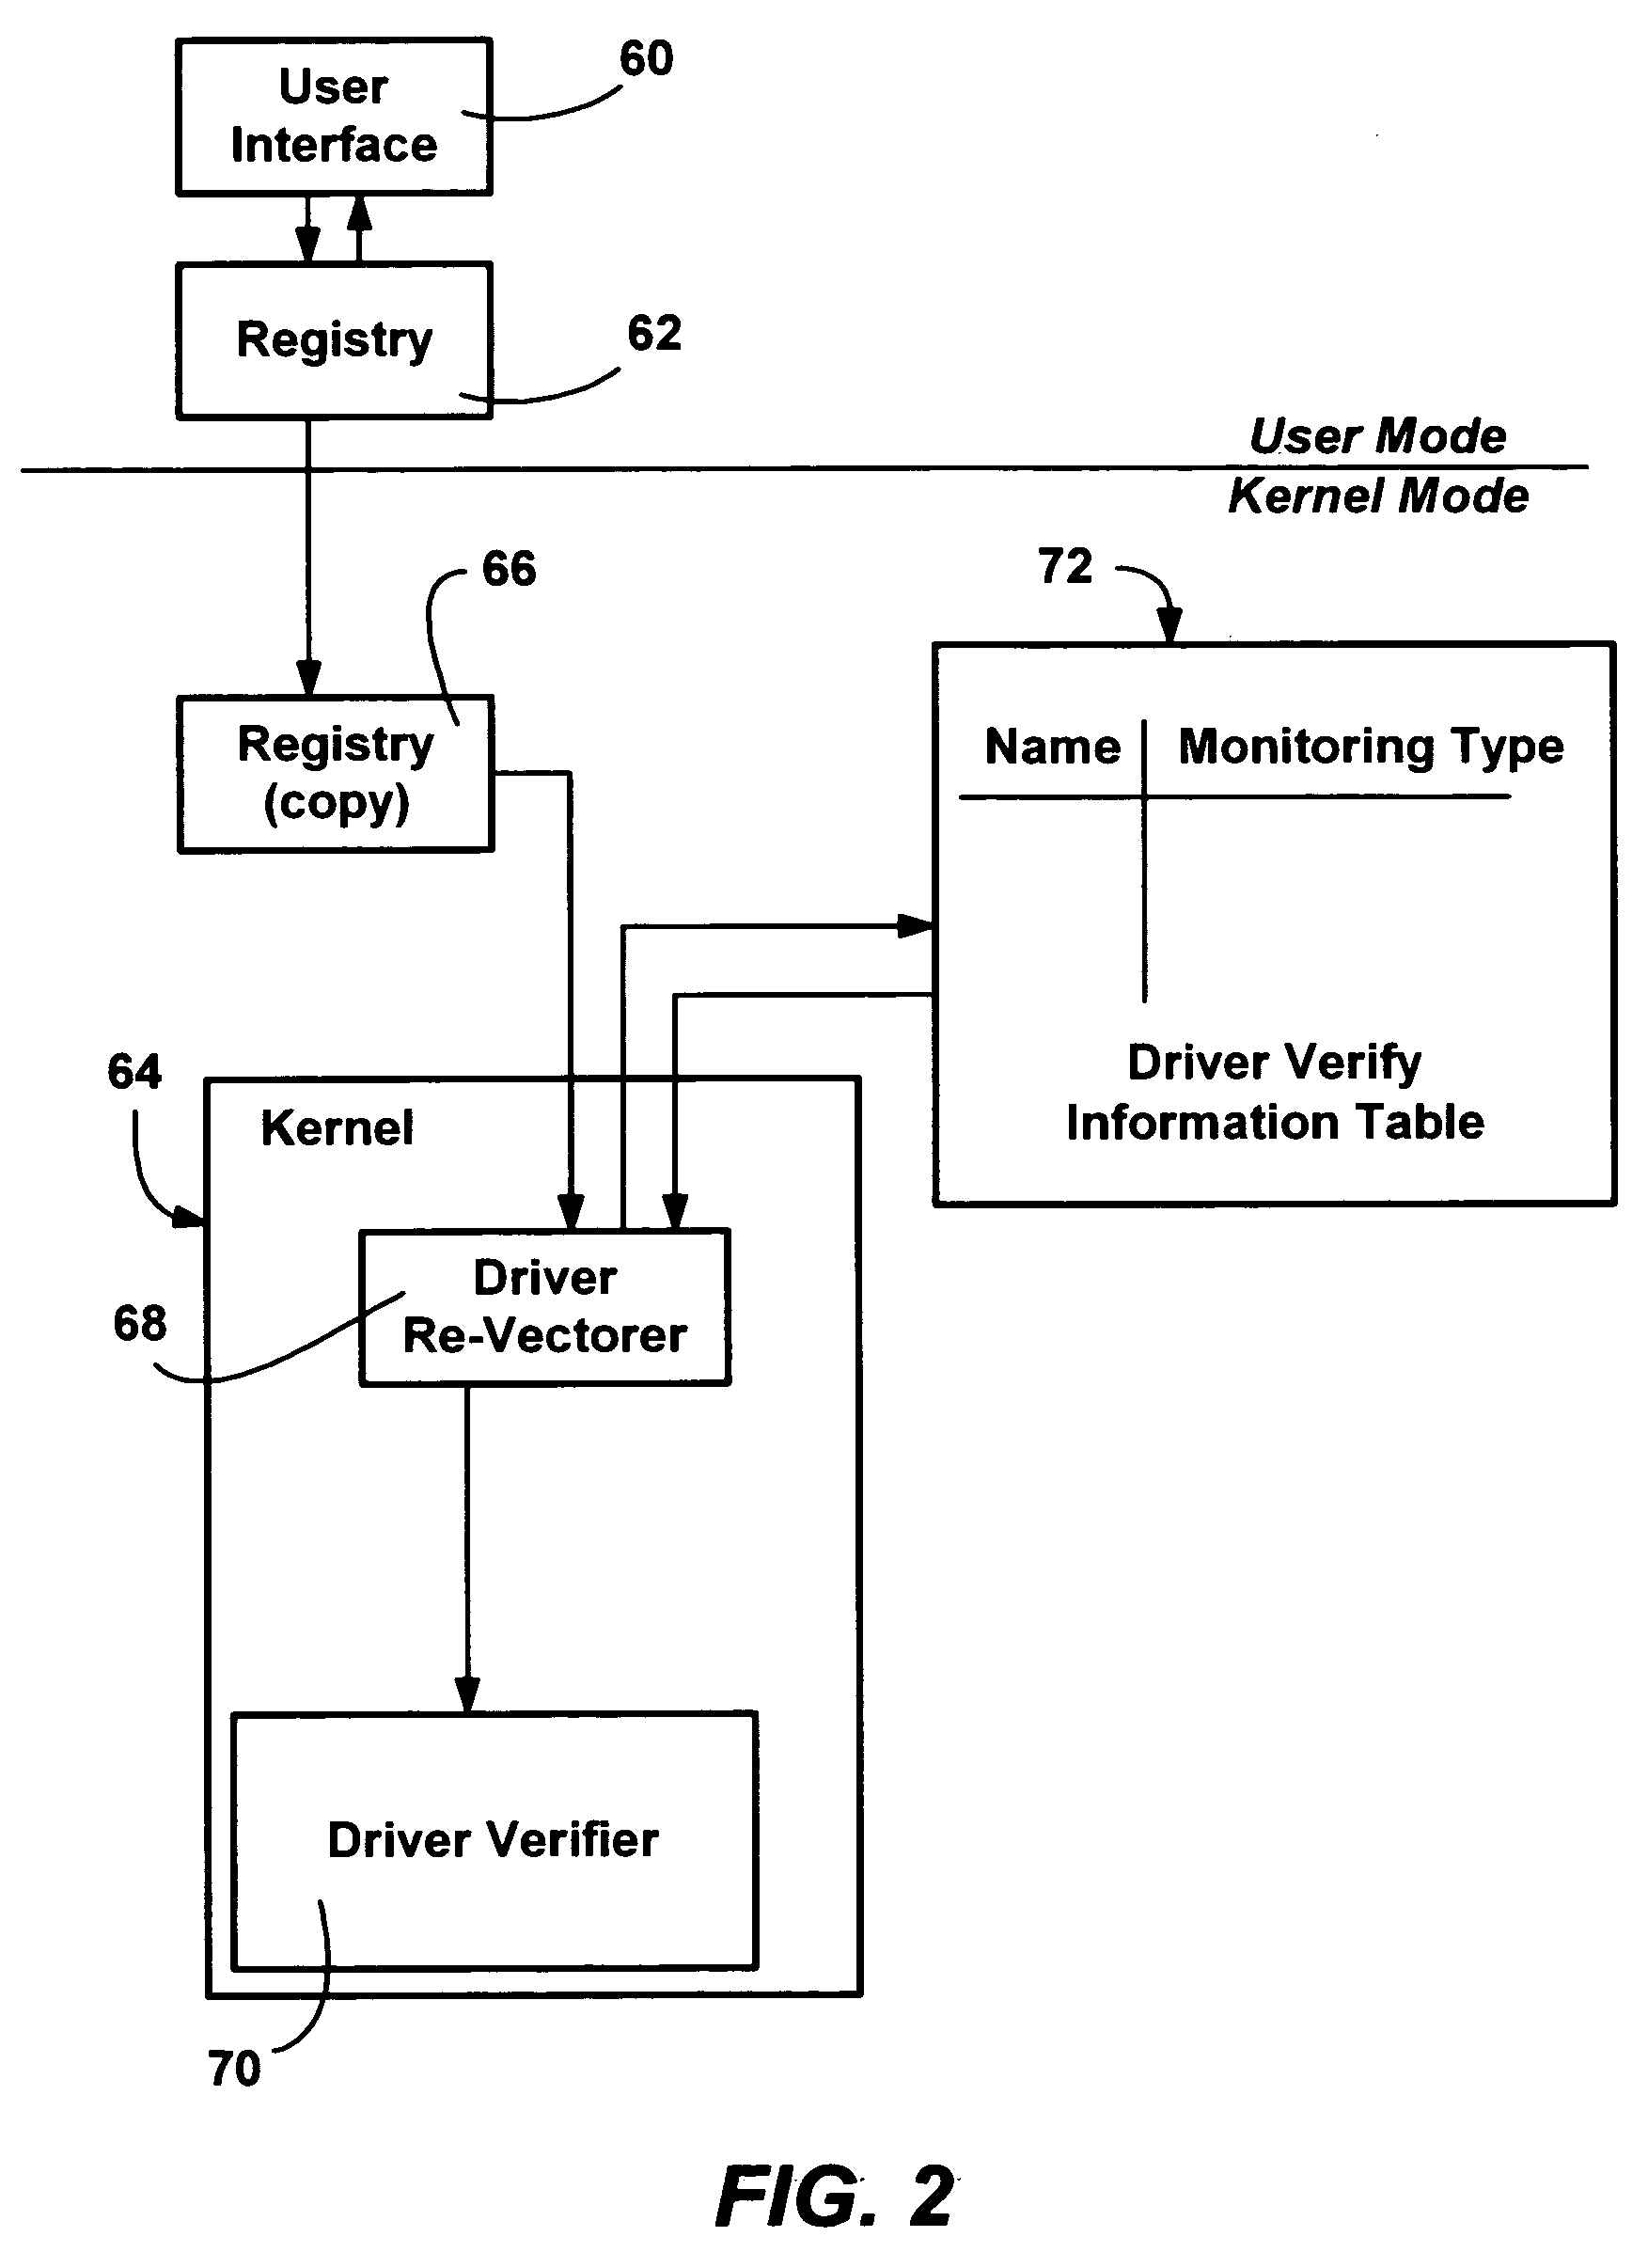 Method and system for monitoring and verifying software drivers